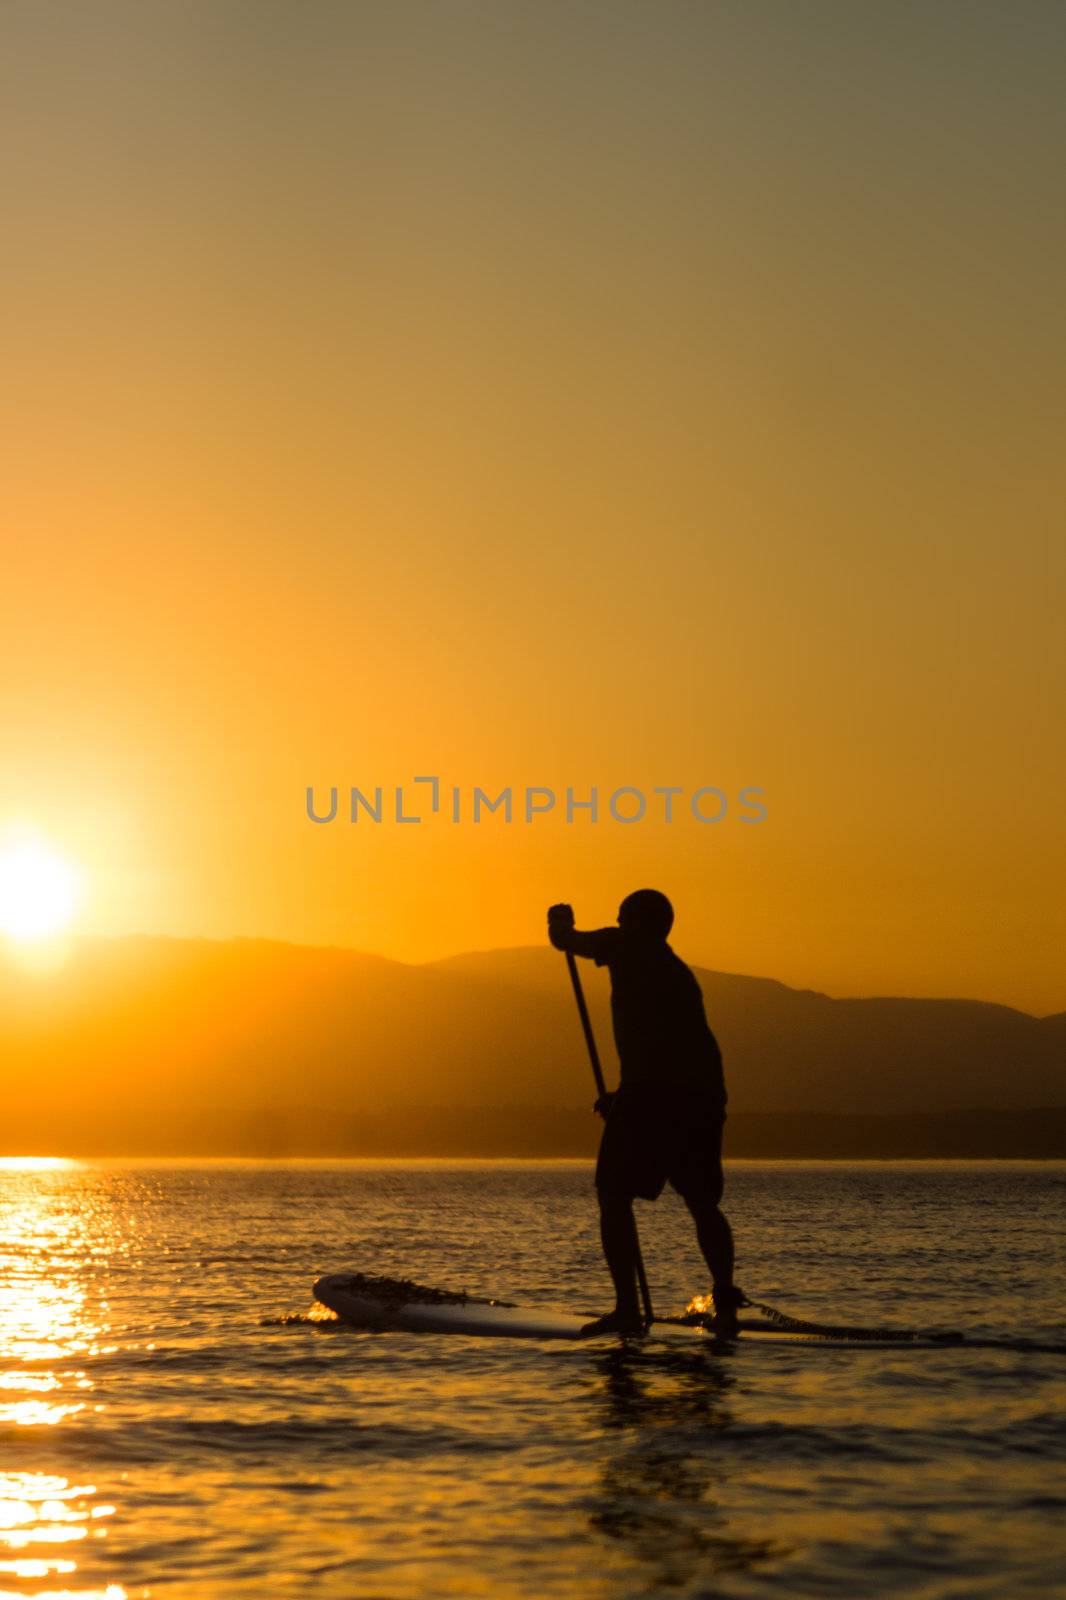 Man paddling stand up paddle board at sunset with mountains in background.